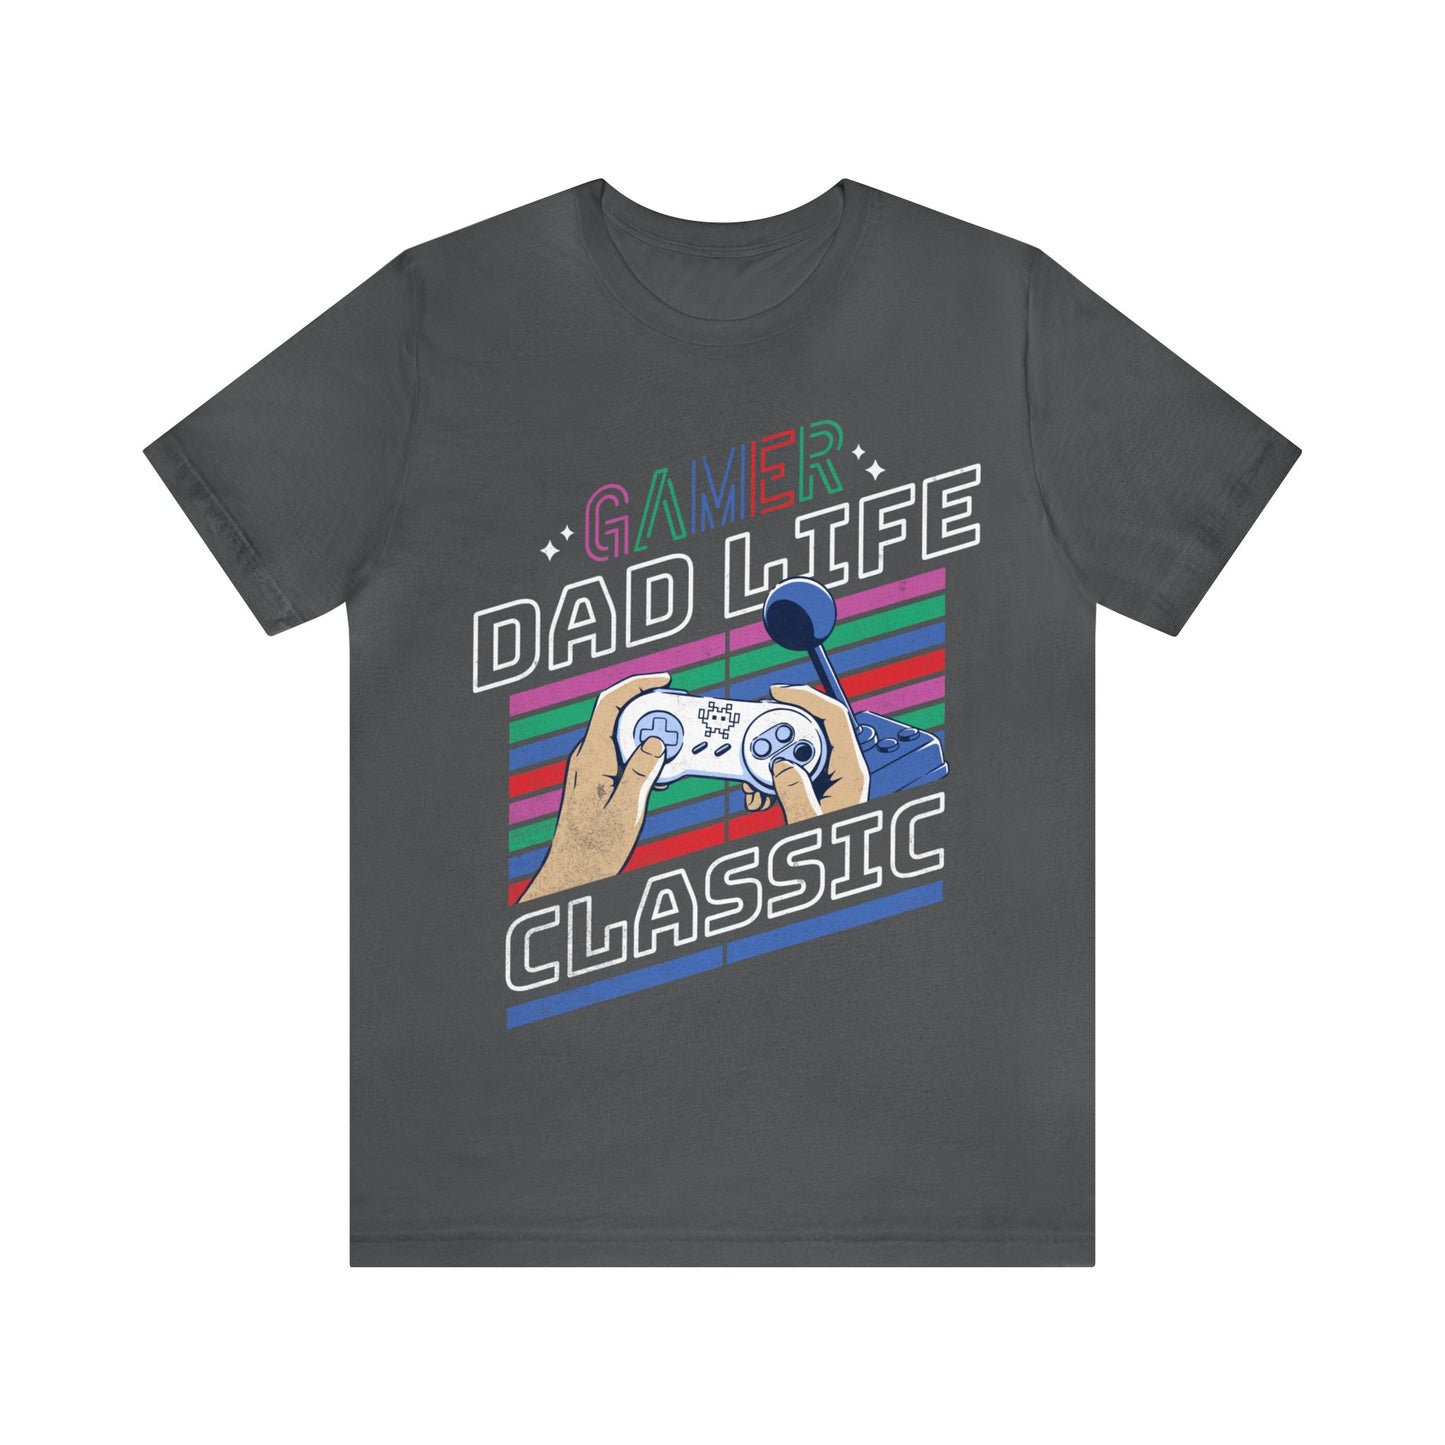 Gamer Dad Shirt, Gaming Dad T-Shirt, Video Games, Gift for Dad, Funny Gift